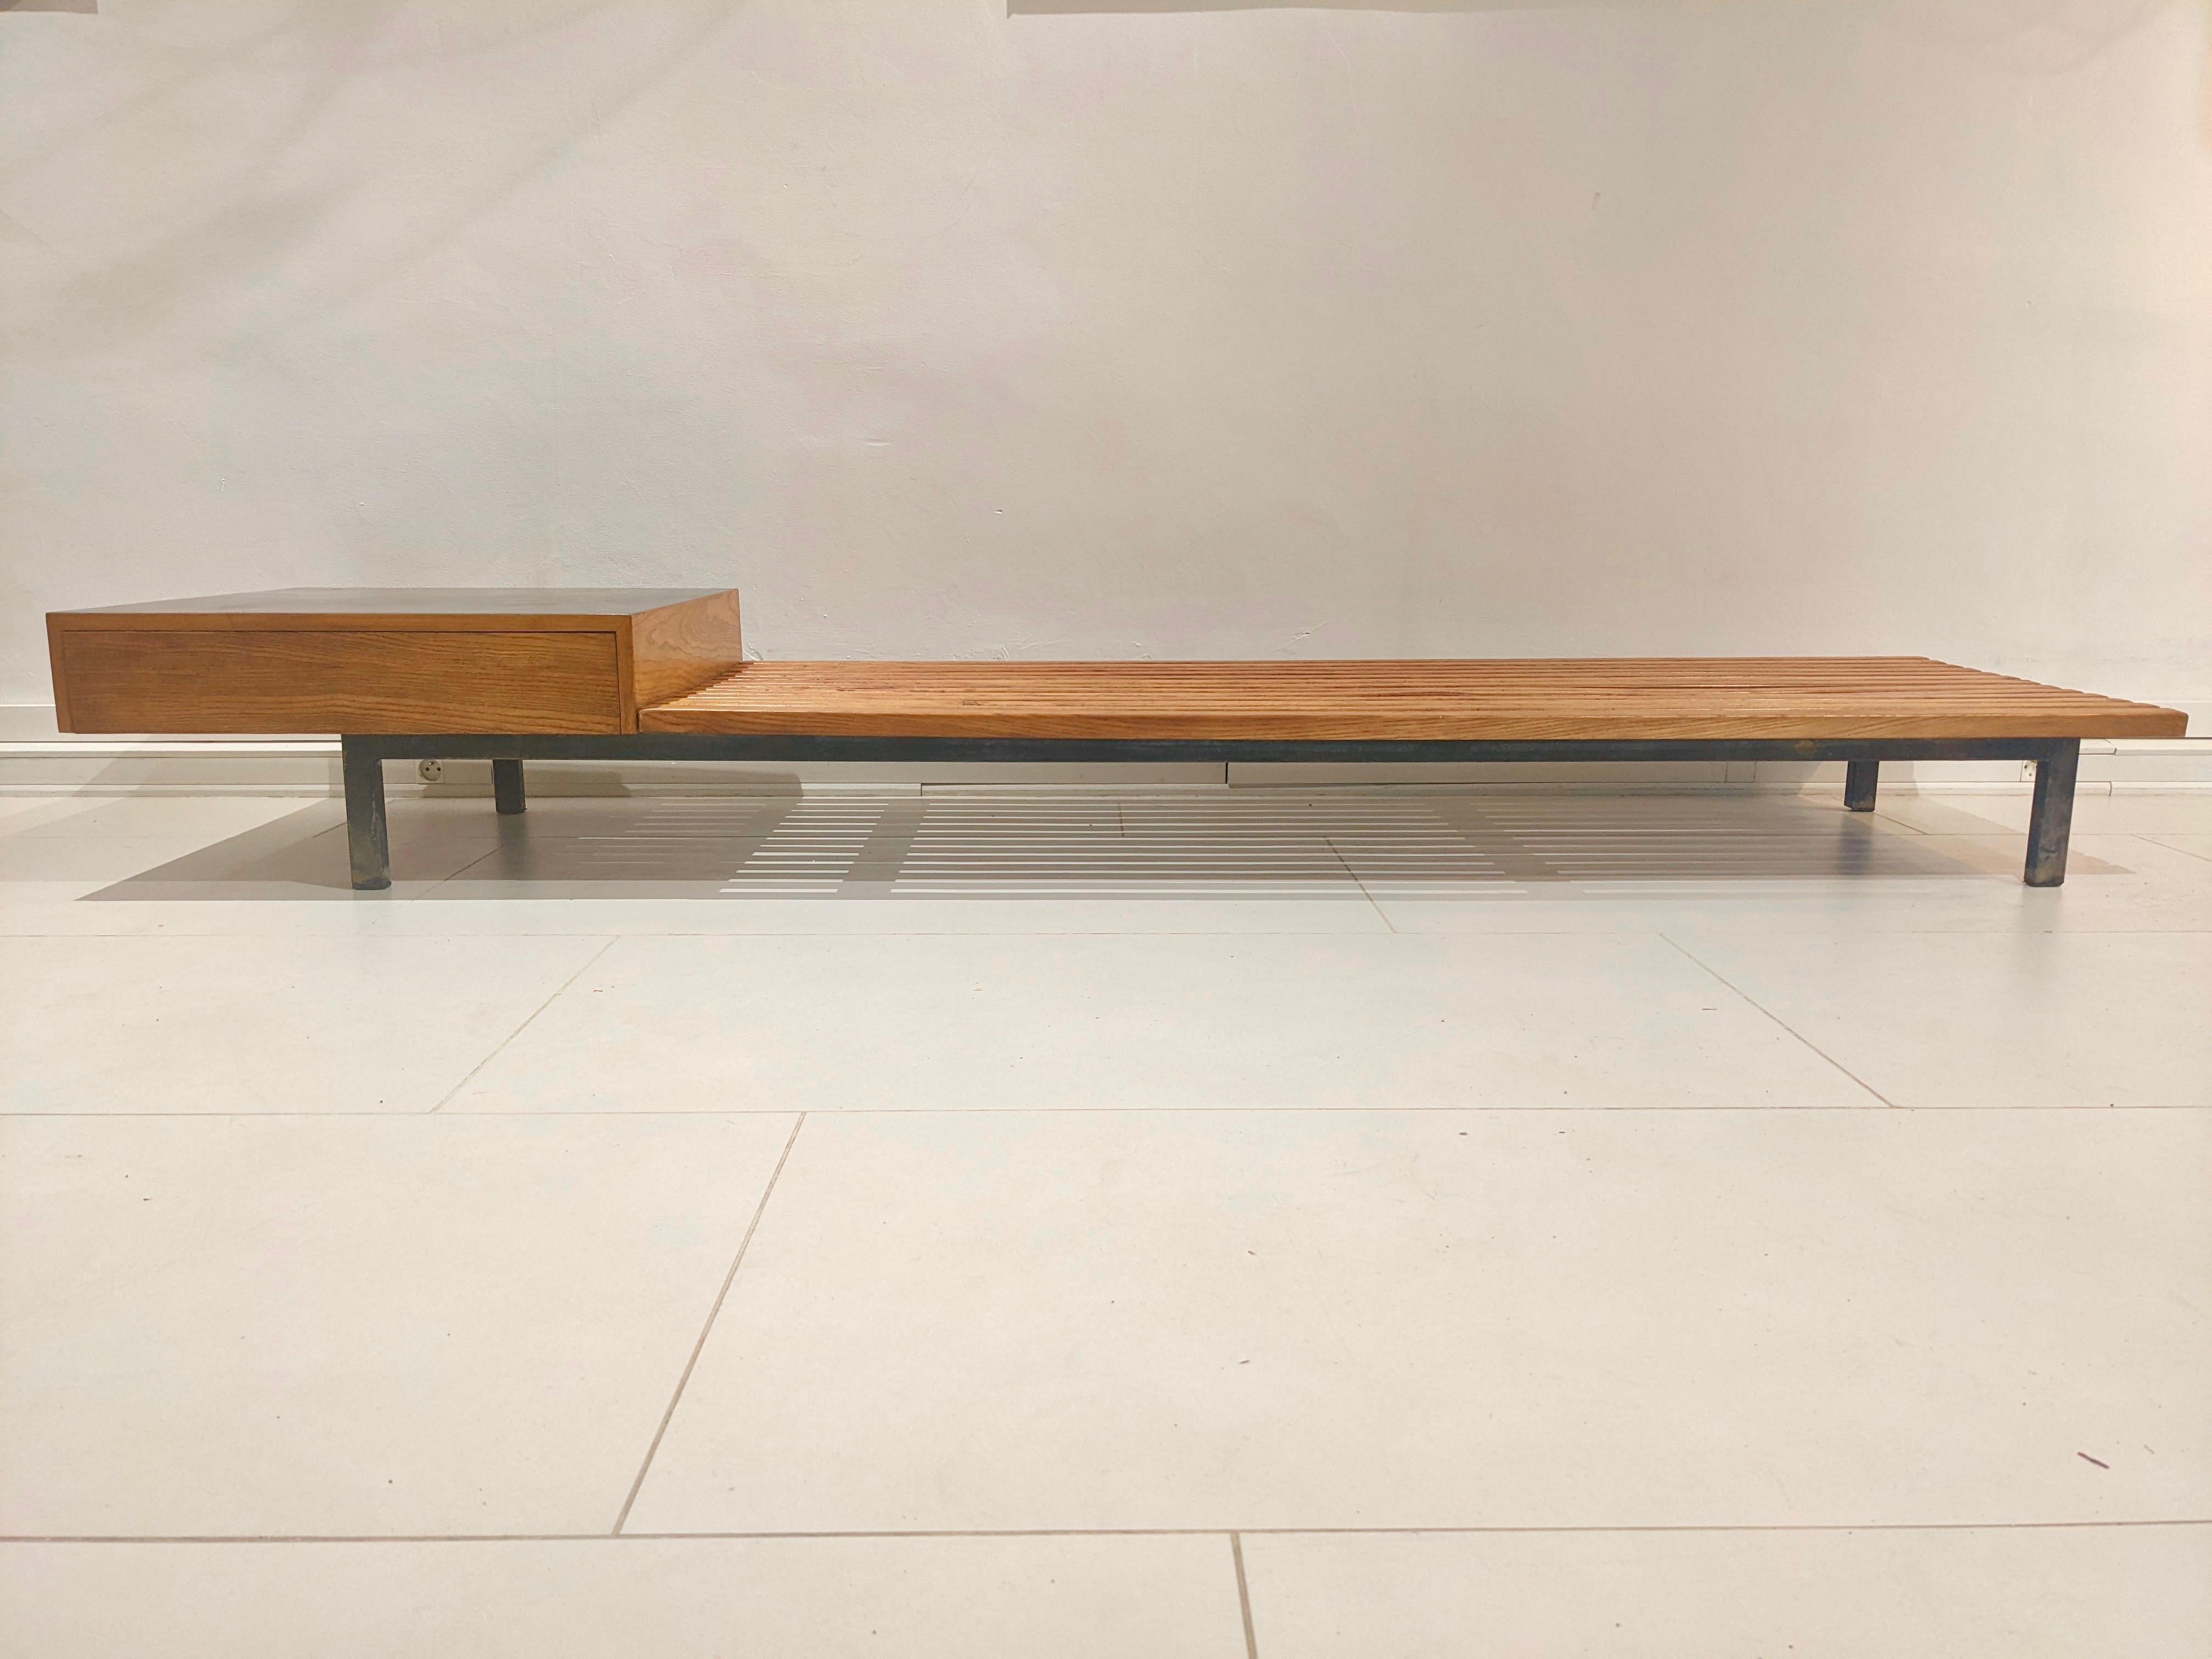 Mauritanian Cansado Bench with Drawers by Charlotte Perriand